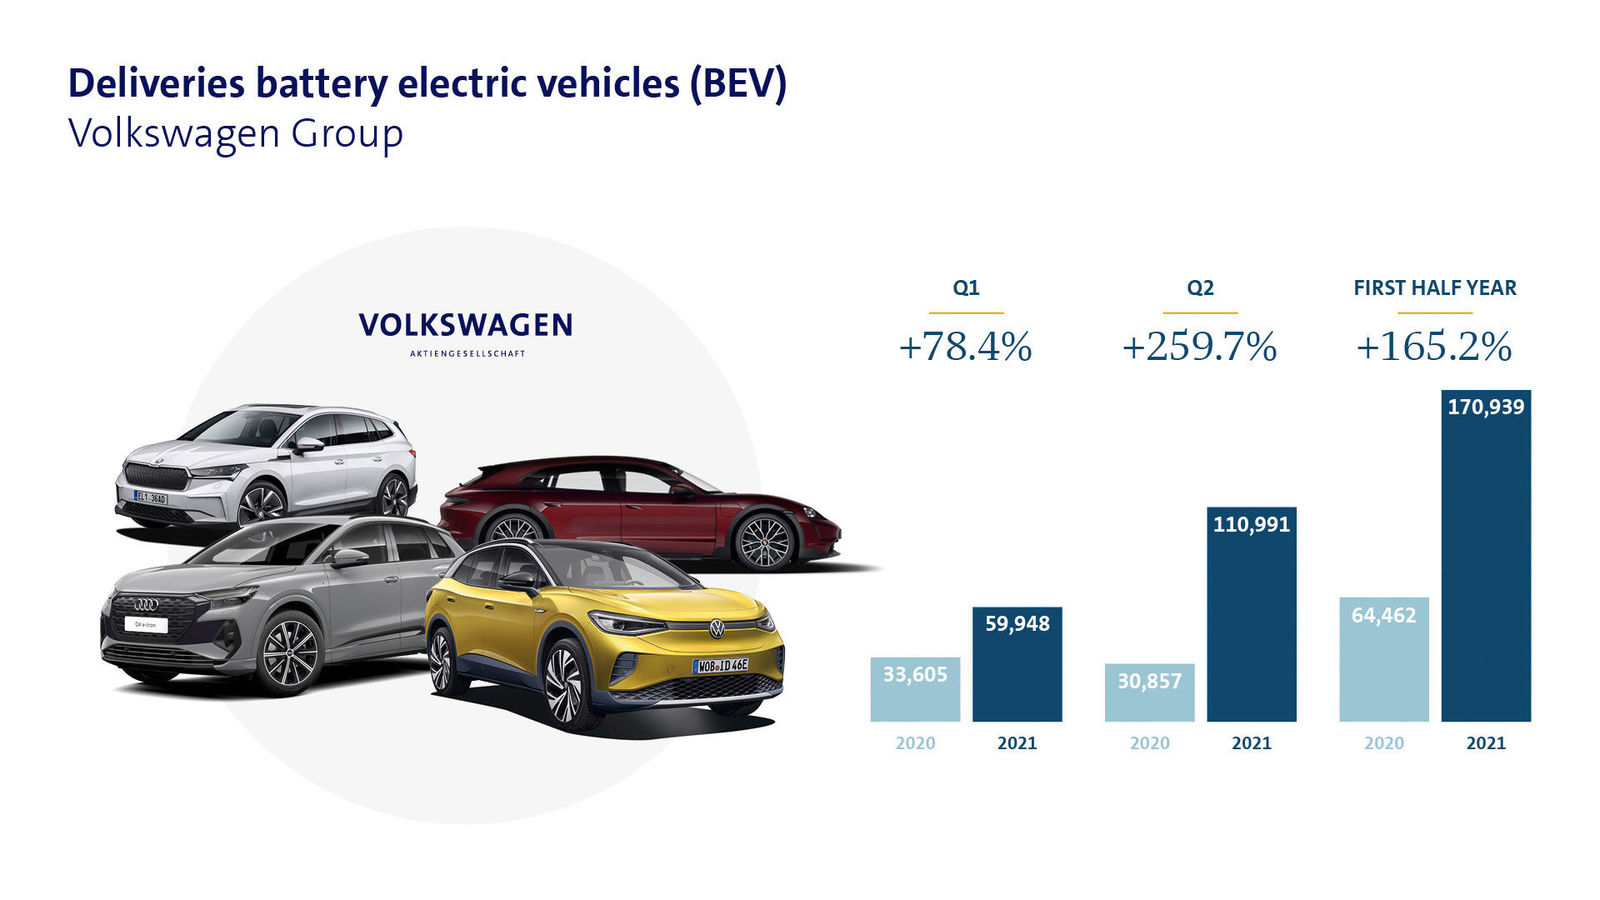 Volkswagen Group more than doubles deliveries of  all-electric vehicles in first half year